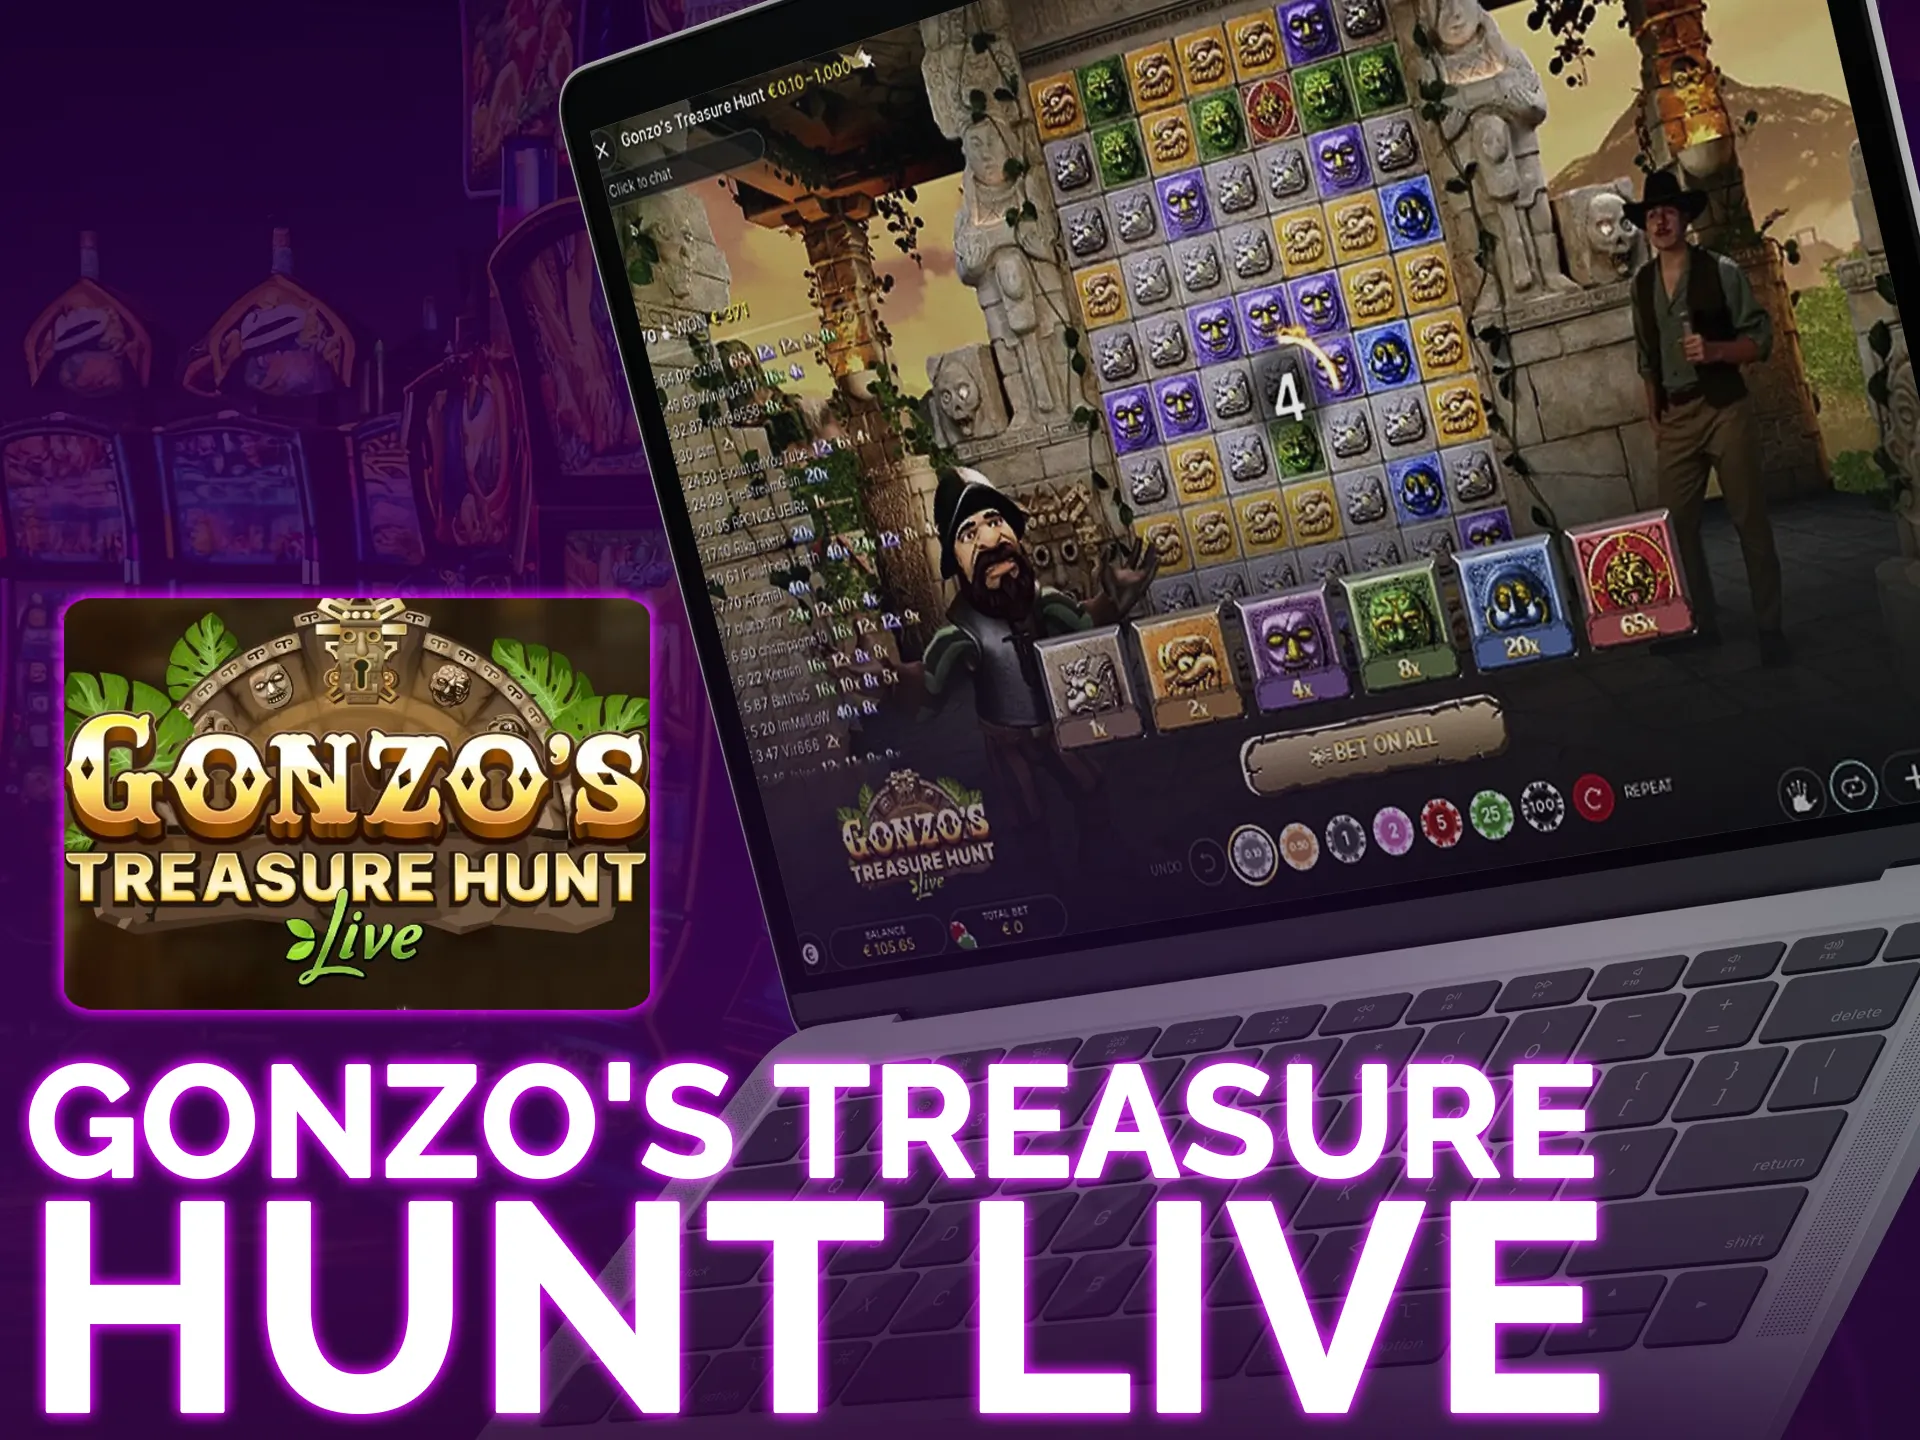 Gonzo's Treasure Hunt: NetEnt's popular, immersive game with exciting features.